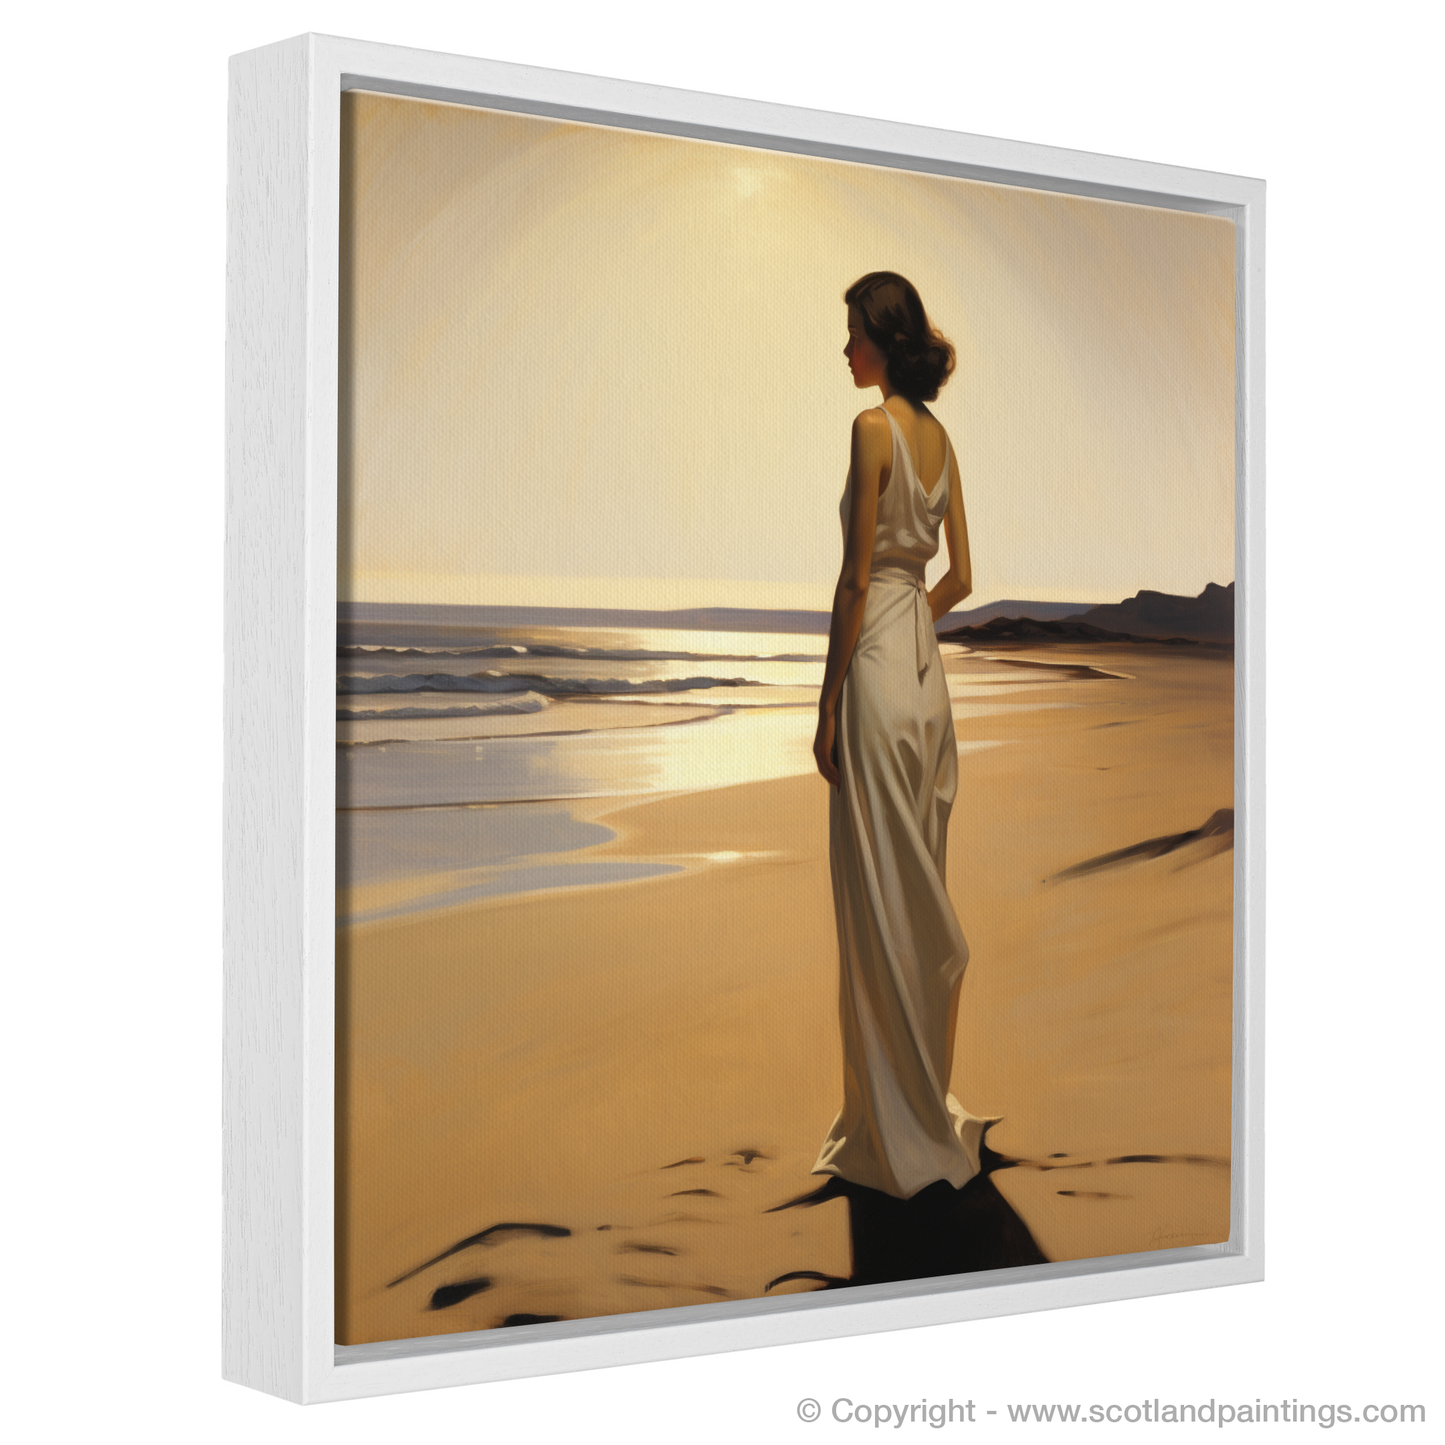 Solitude by the Sea: A Woman's Contemplative Gaze in Troon